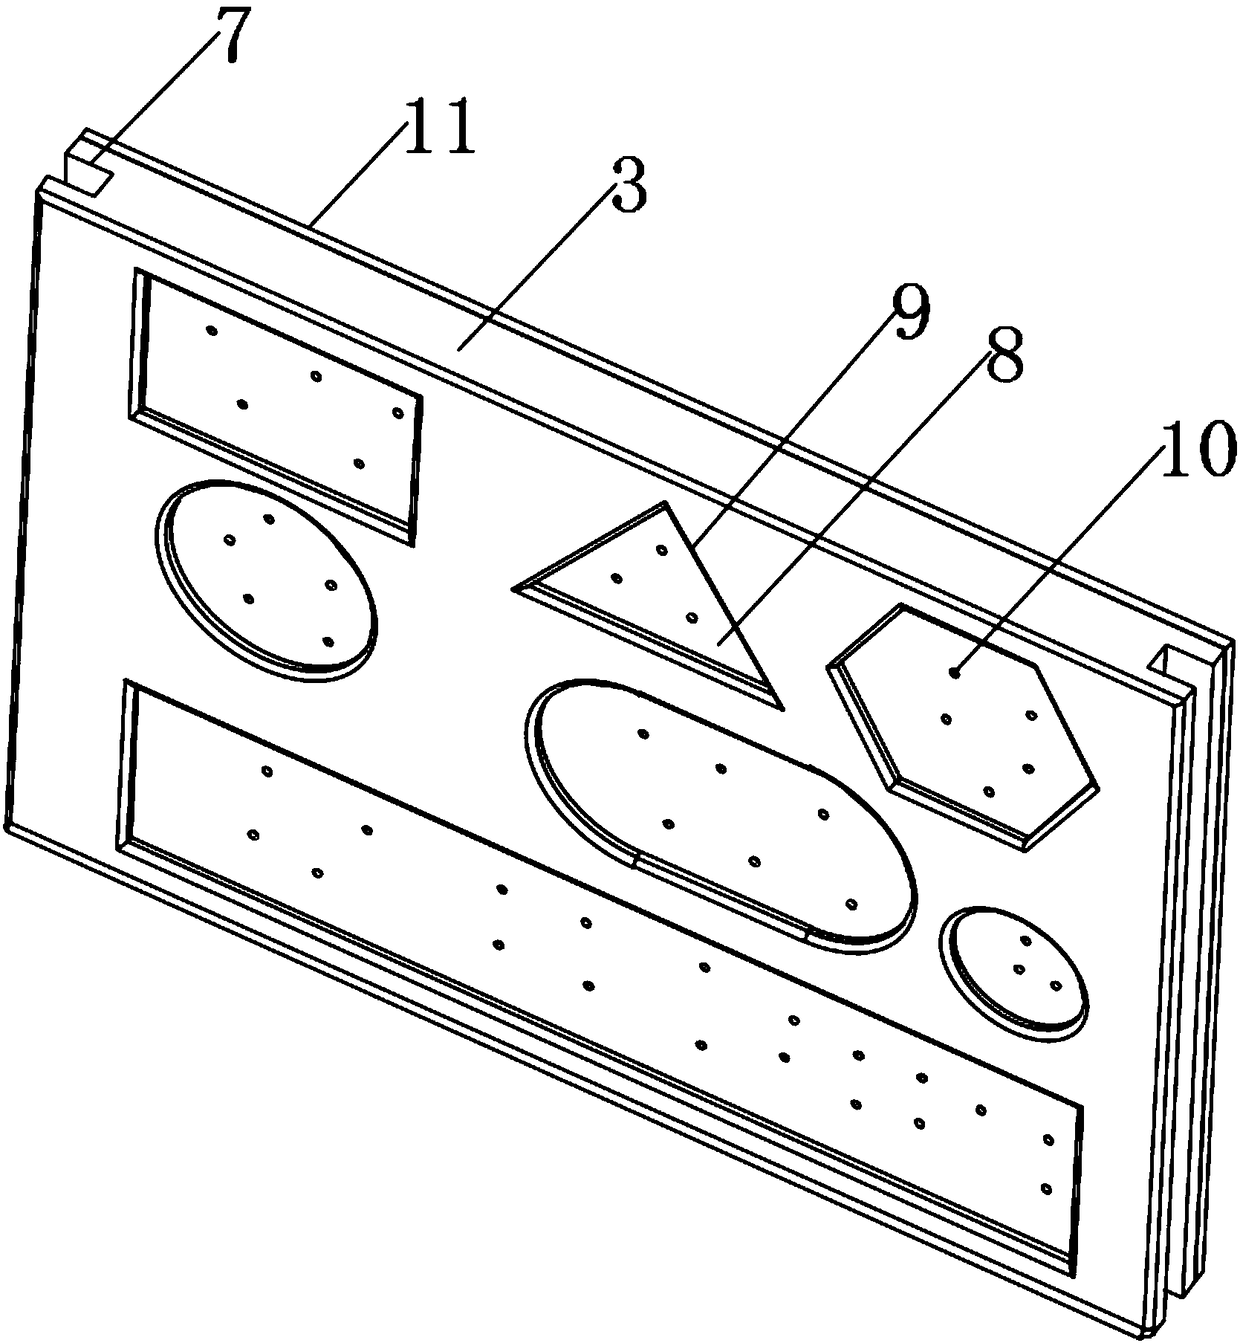 Square specimen fixing box combined and provided with expressage box